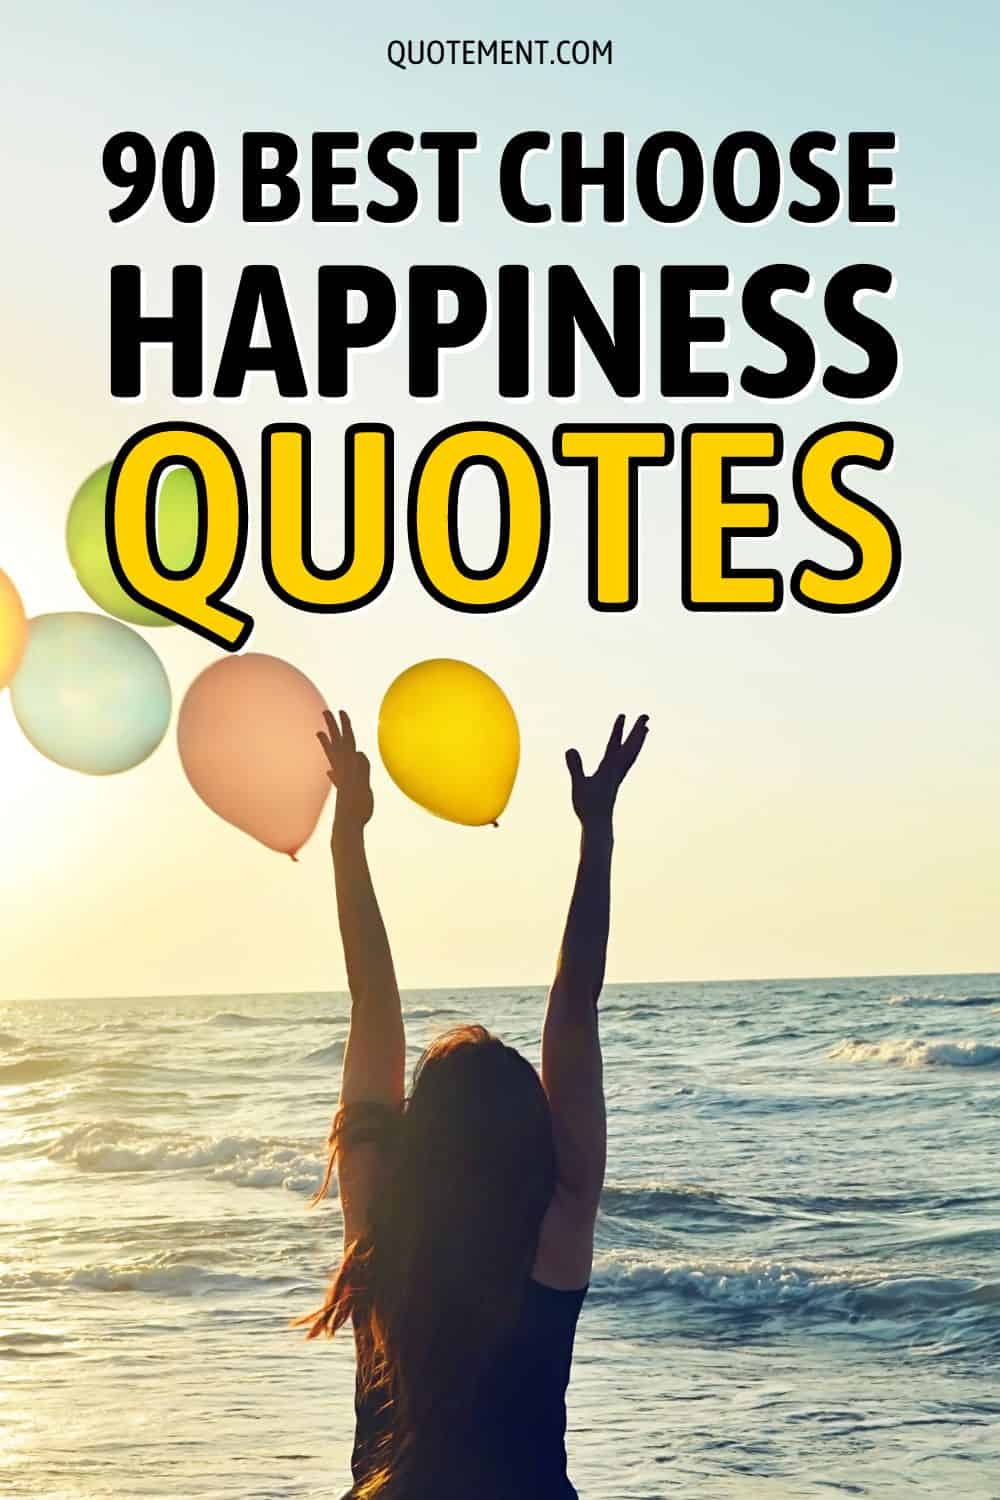 90 Choose Happiness Quotes To Encourage And Inspire You
